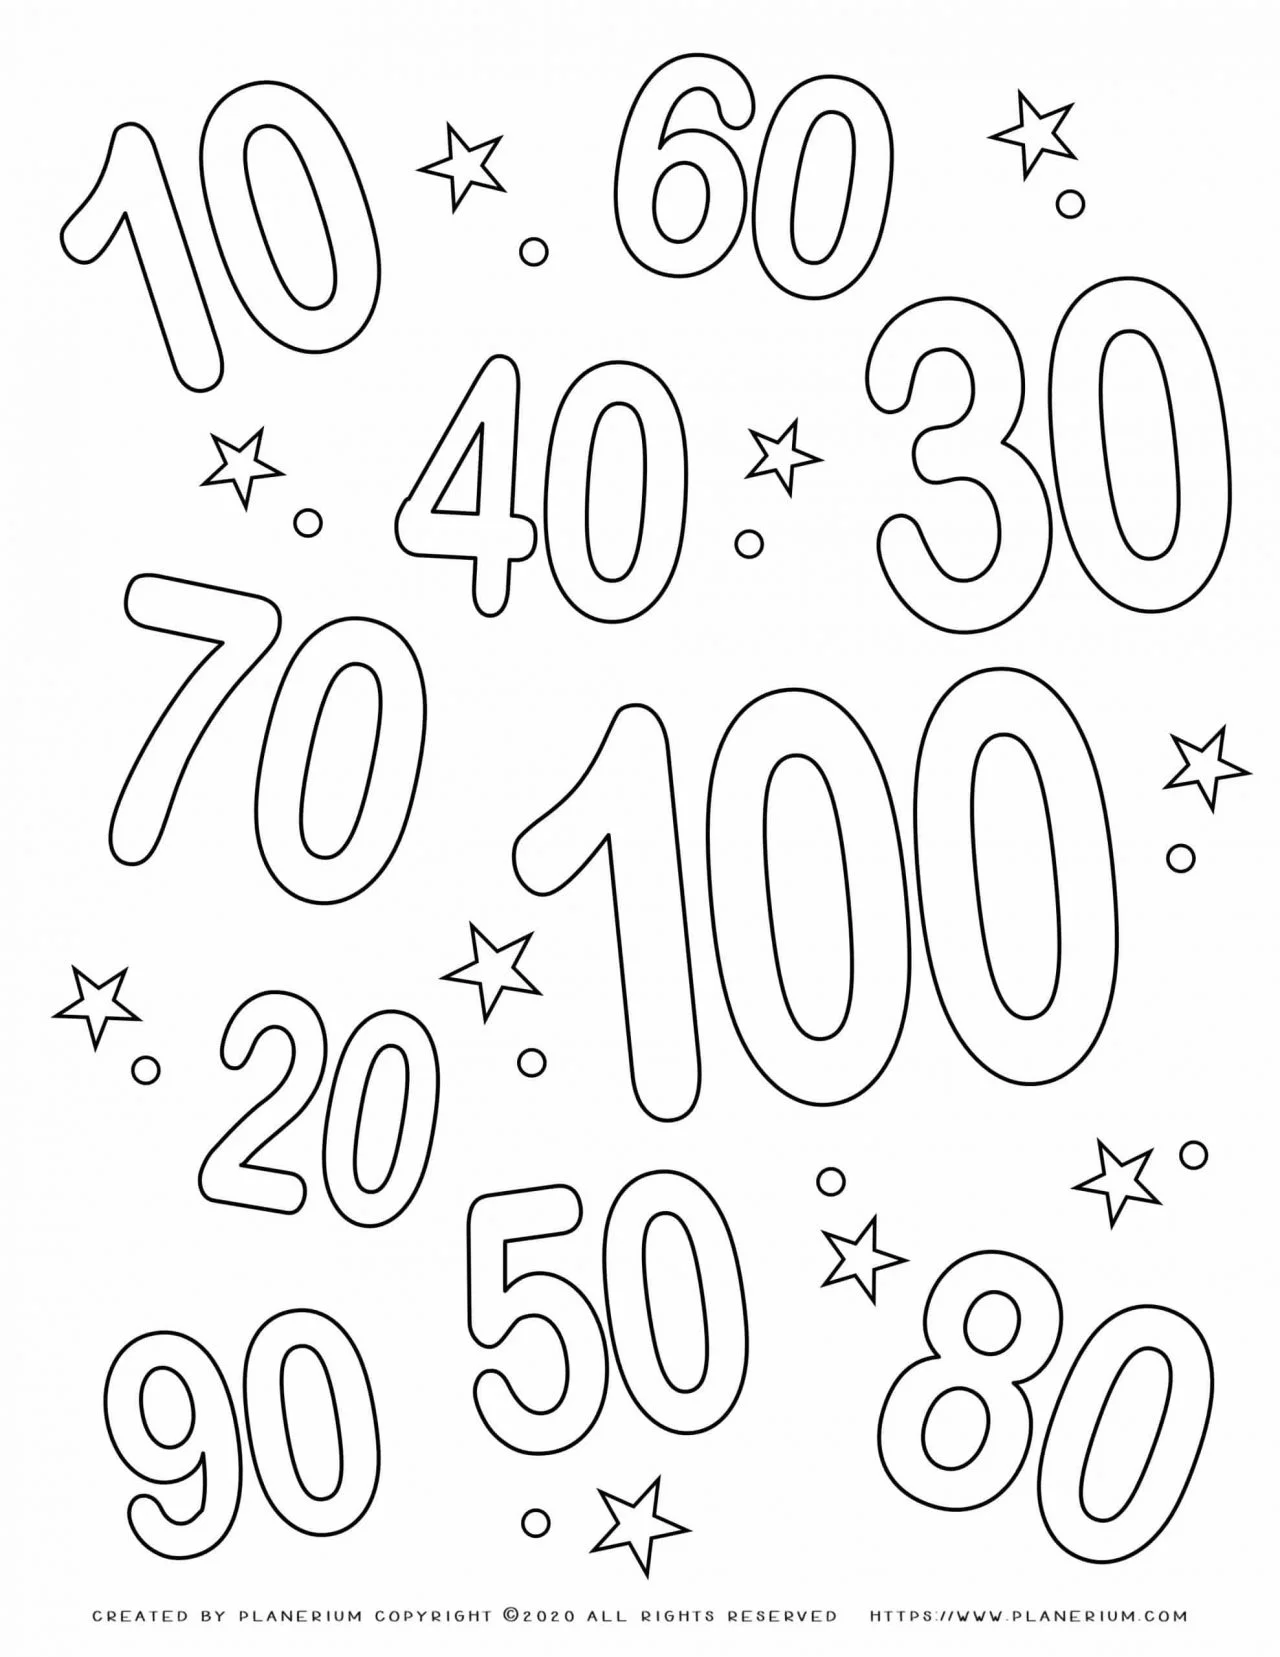 👉 Dot to Dot - Connect the Dots with Numbers 1 to 30